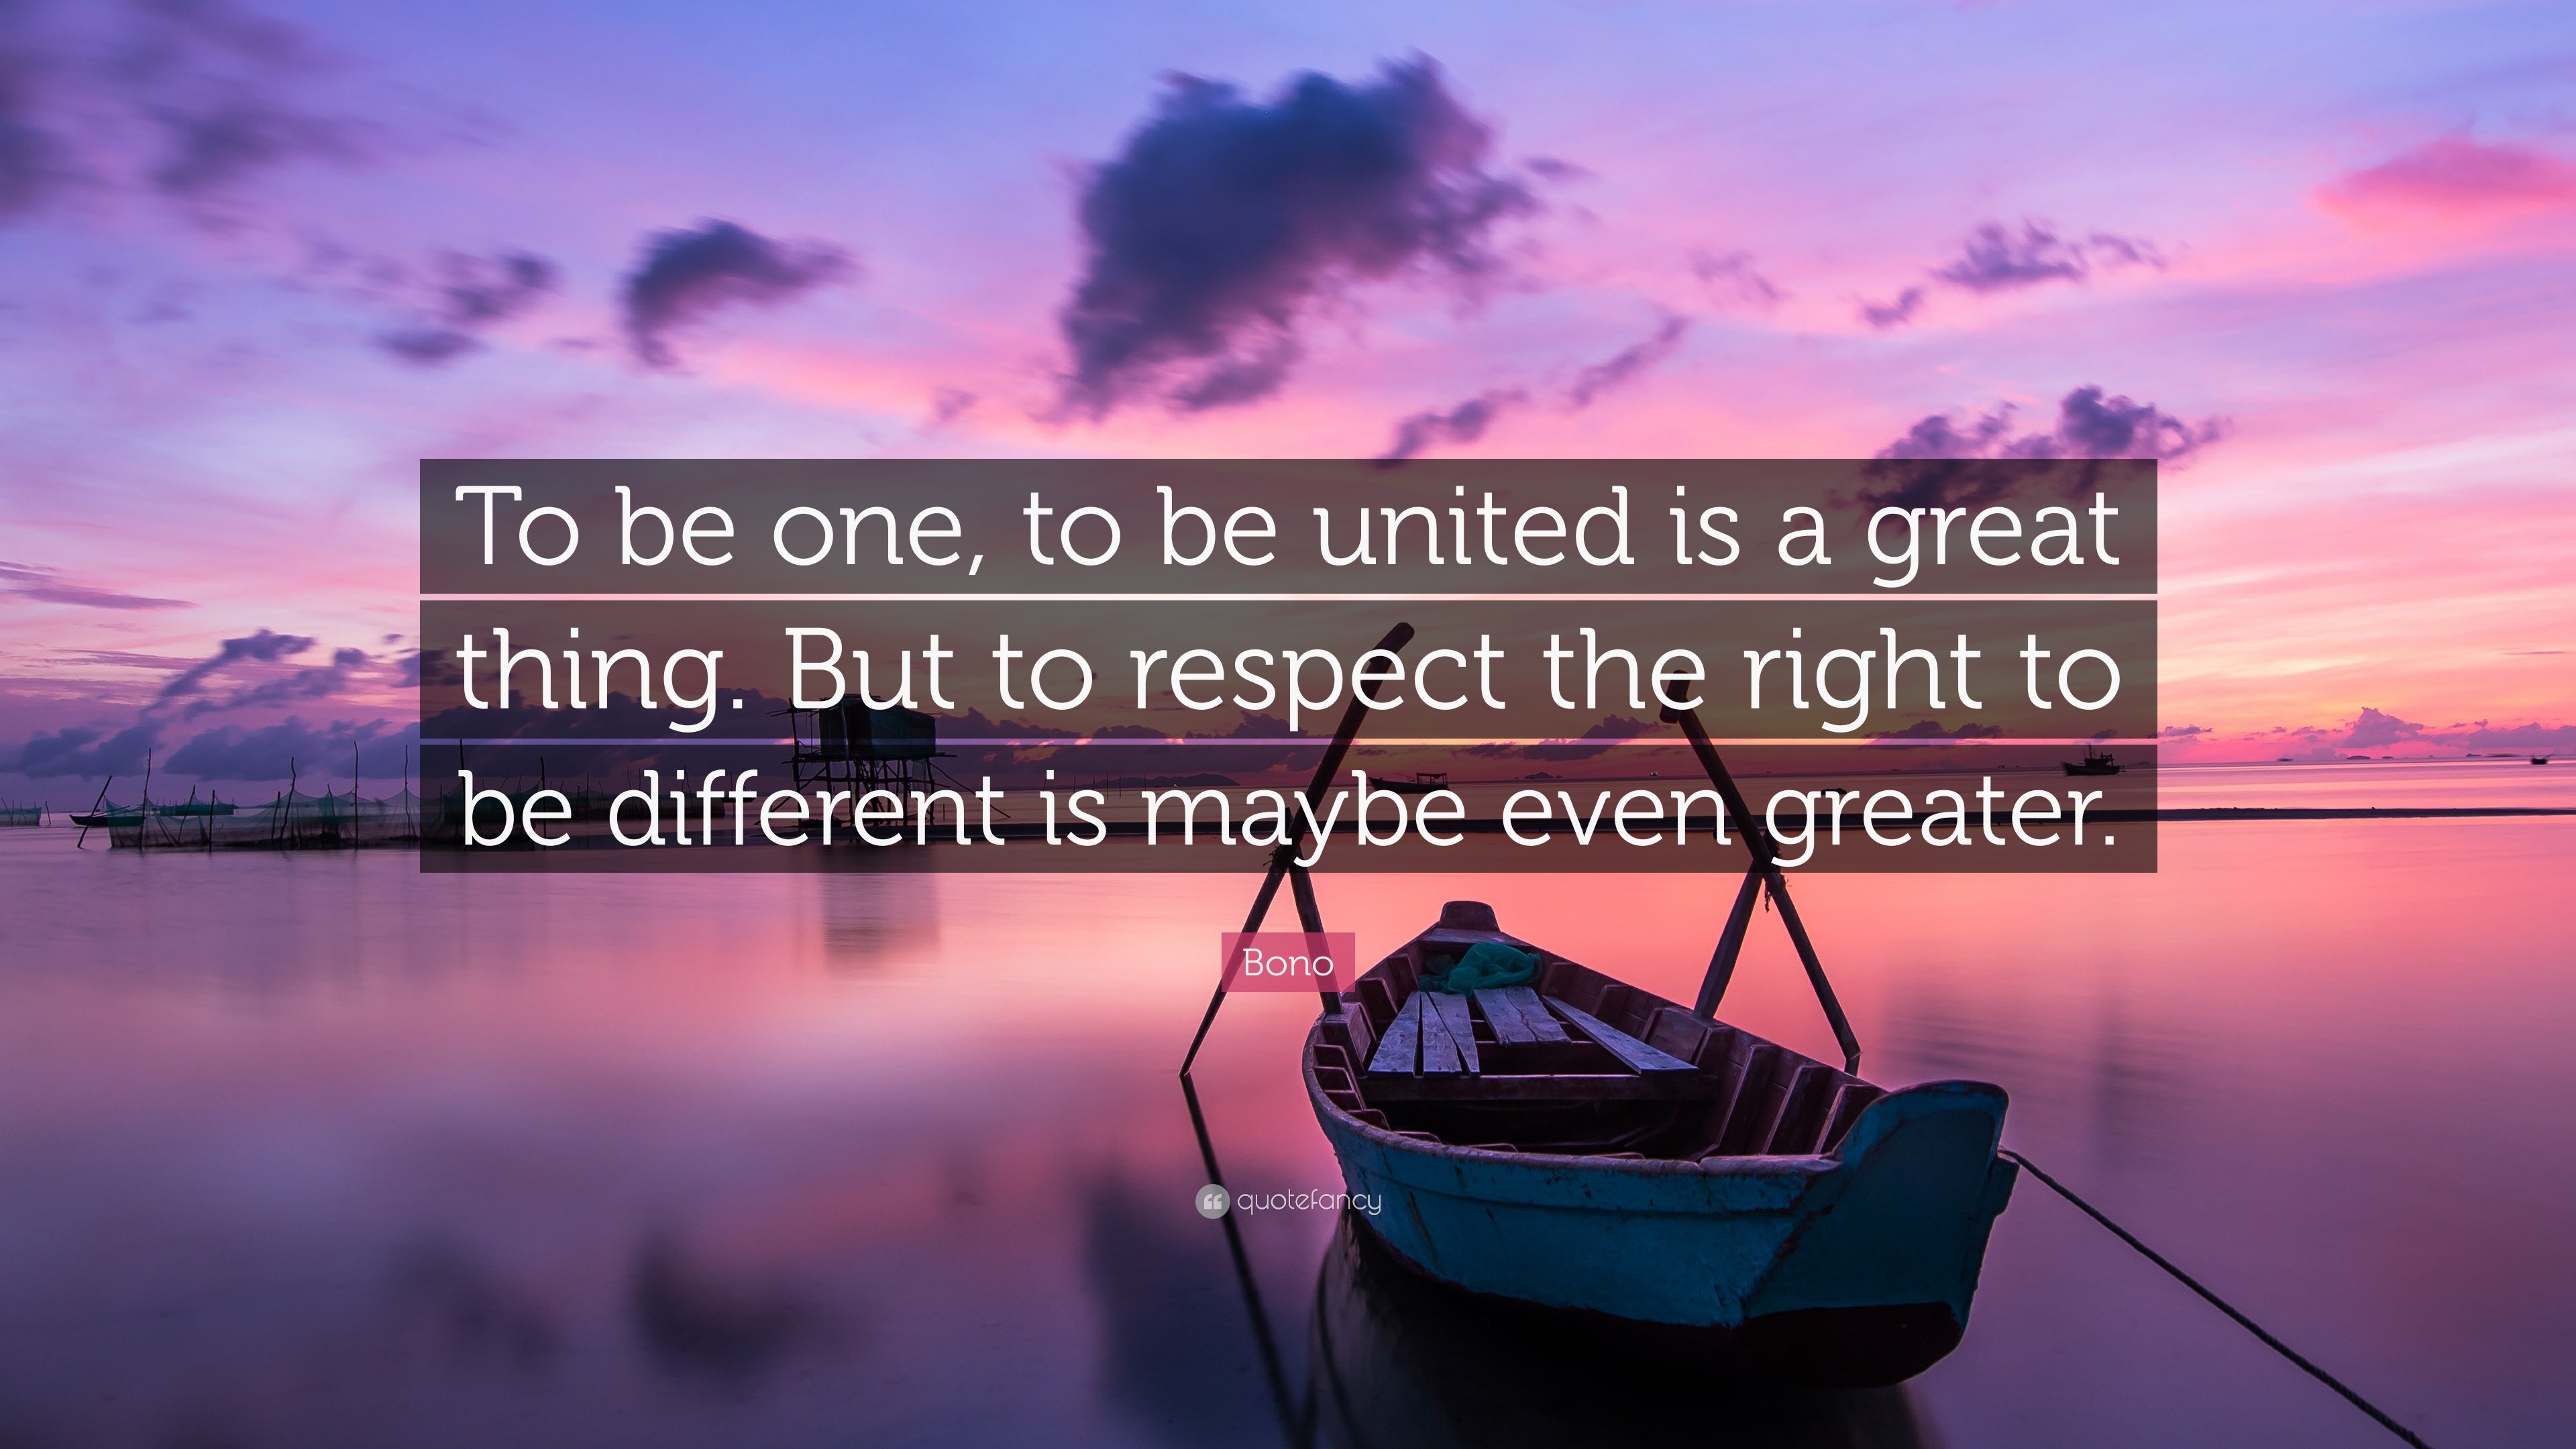 Bono Quote To Be One To Be United Is A Great Thing But To Respect The Right To Be Different Is Maybe Even Greater 12 Wallpapers Quotefancy